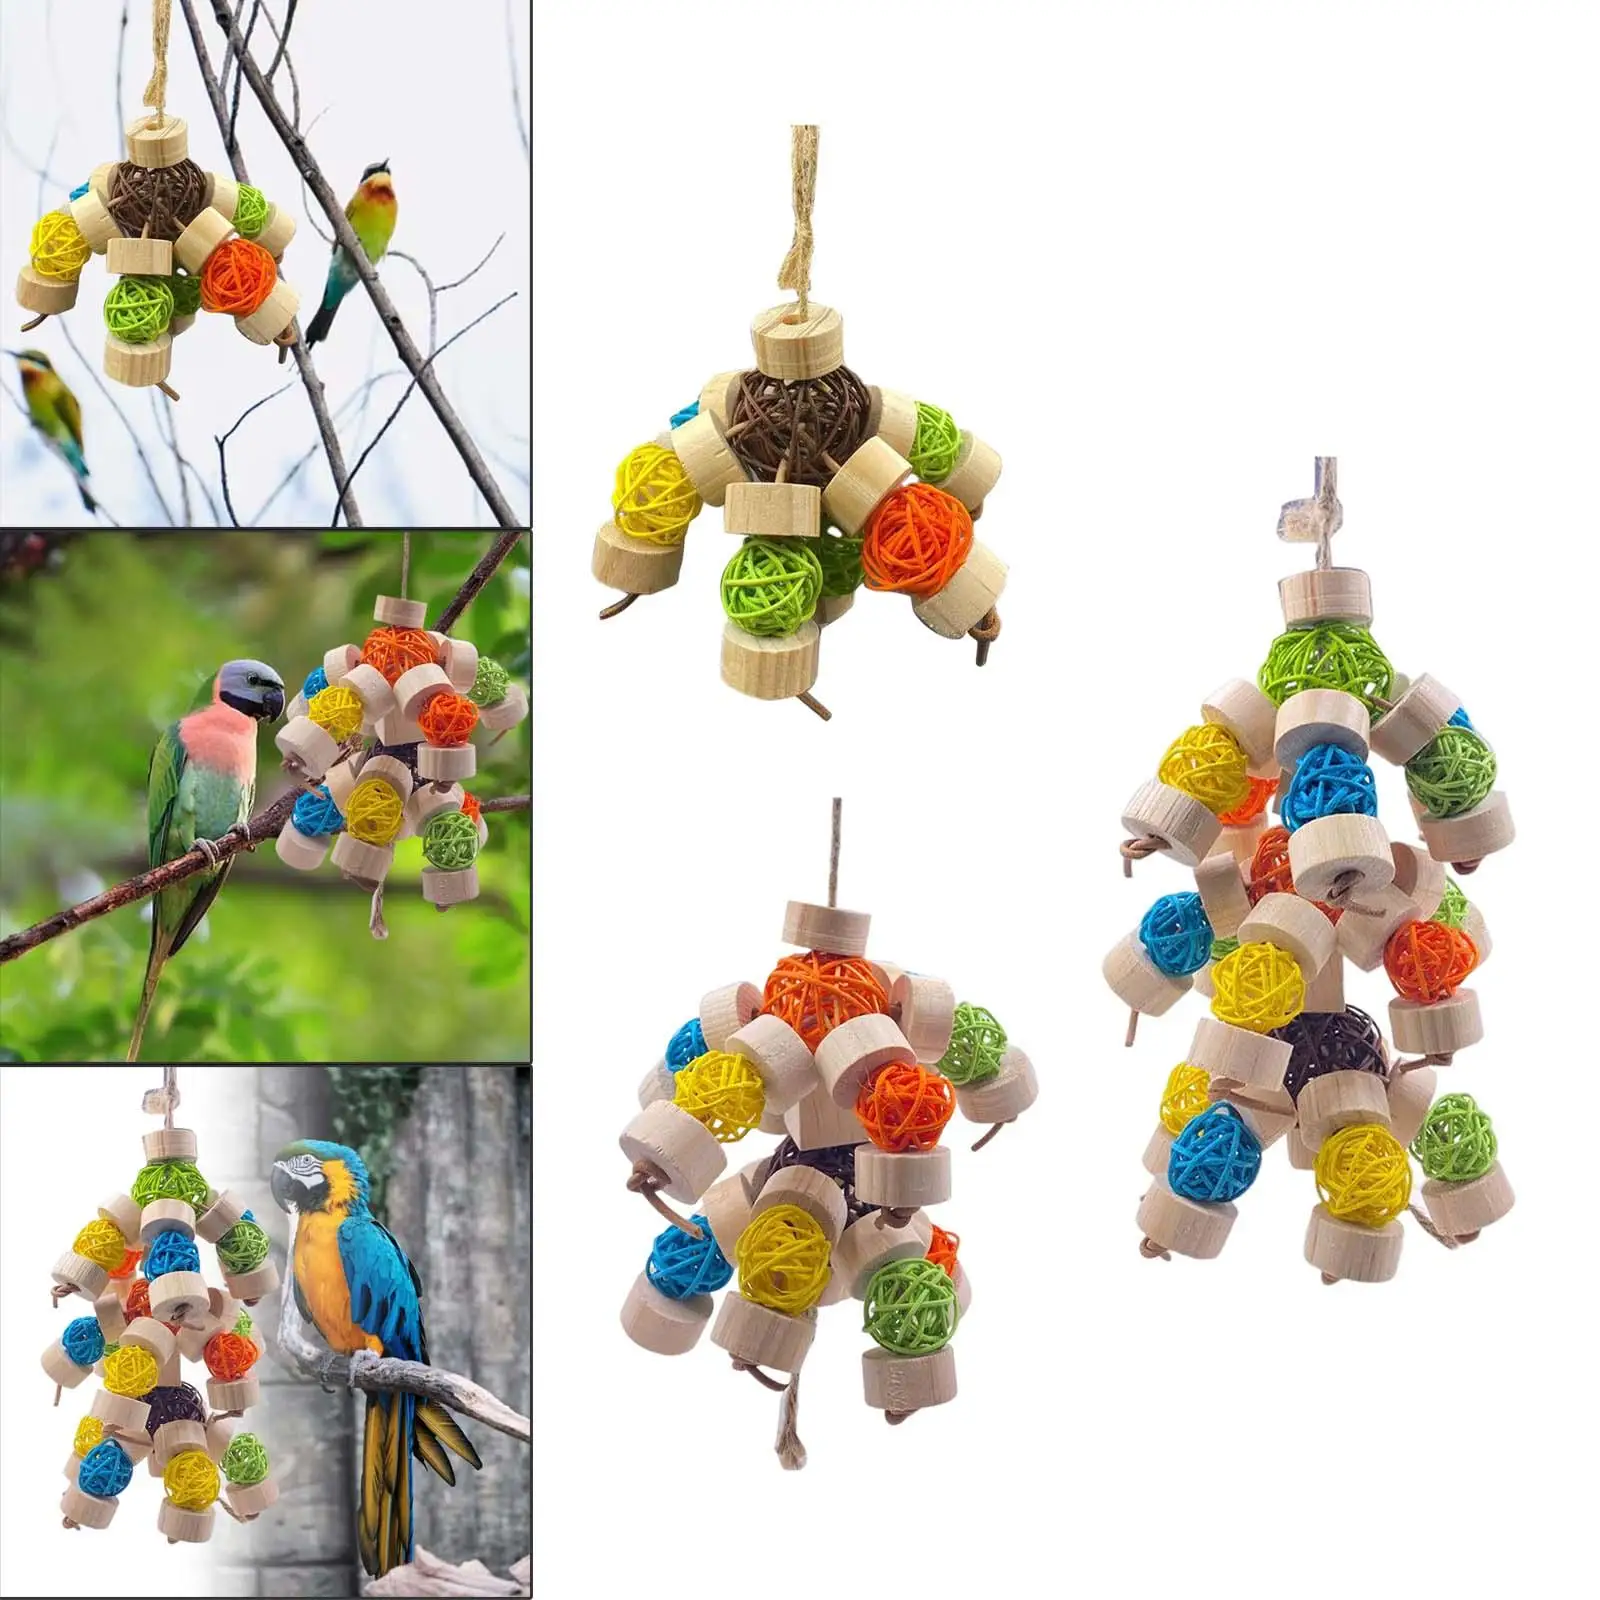 Parrot Chewing Toy Attractive Lightweight Bird Block Knots Tearing Toy Birds Chew Toys for Parakeets African Grey Parrots Macaws